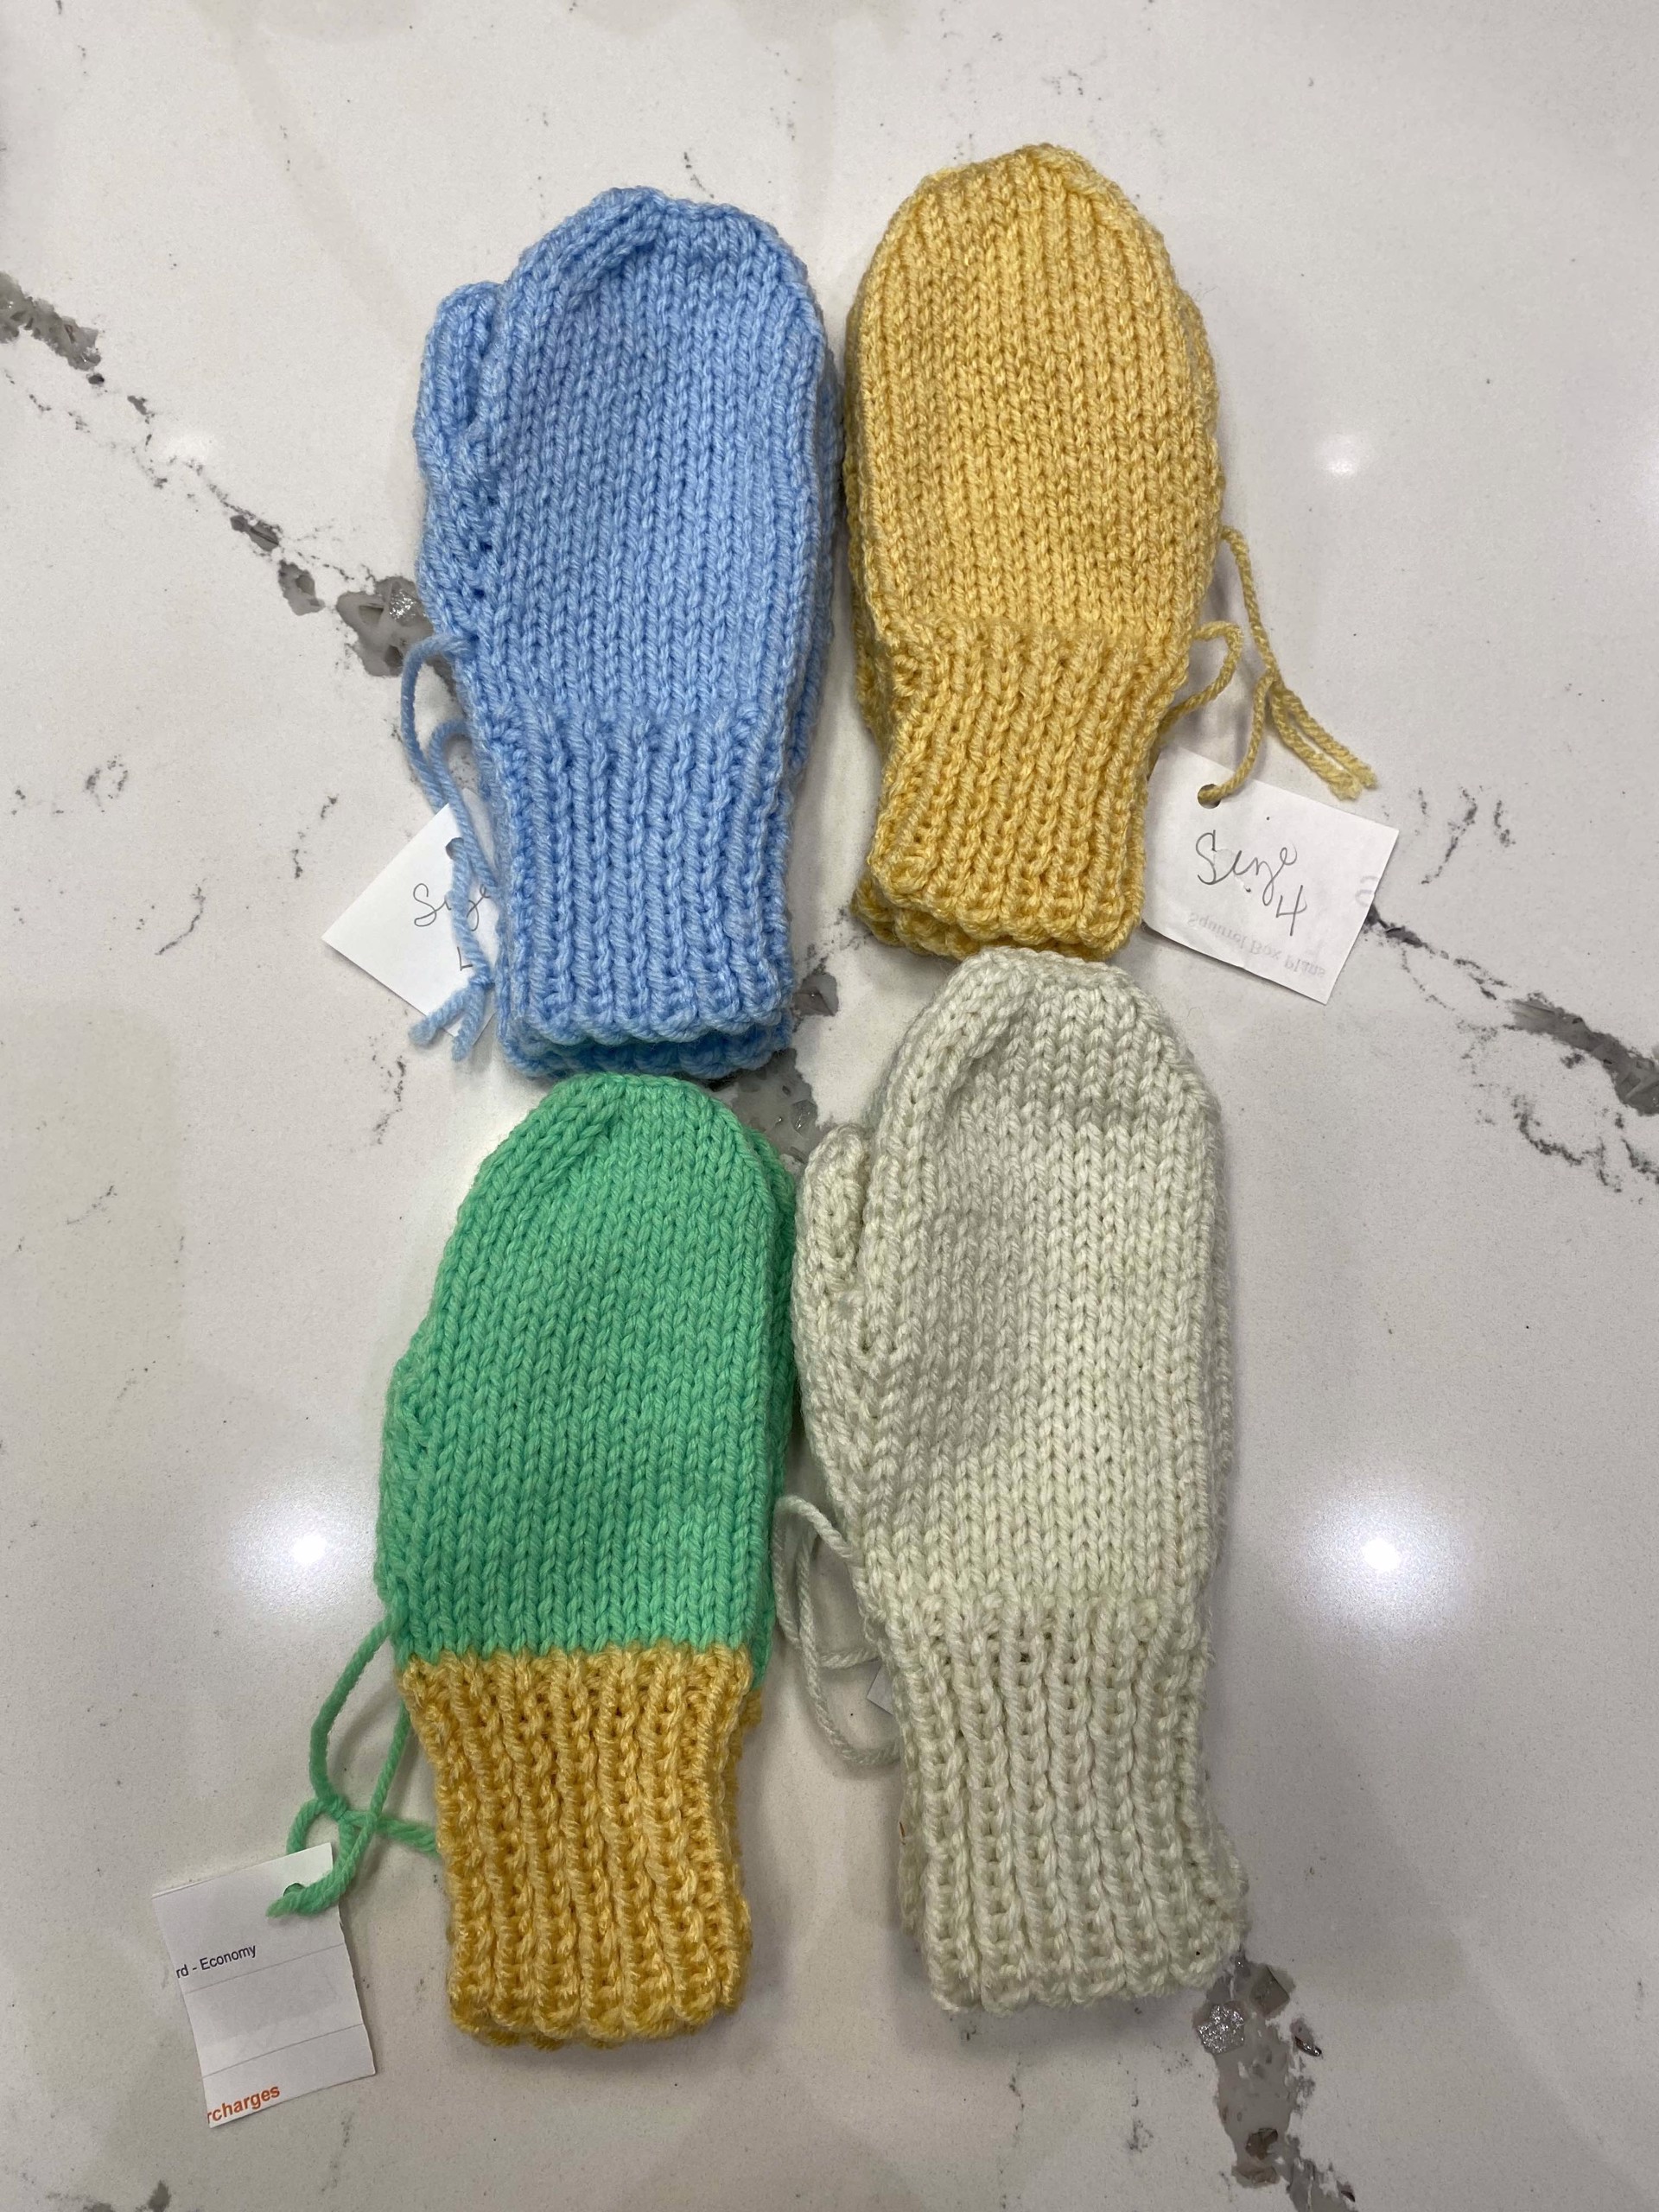 Handmade Mittens - Size 4 by Cathy Miller